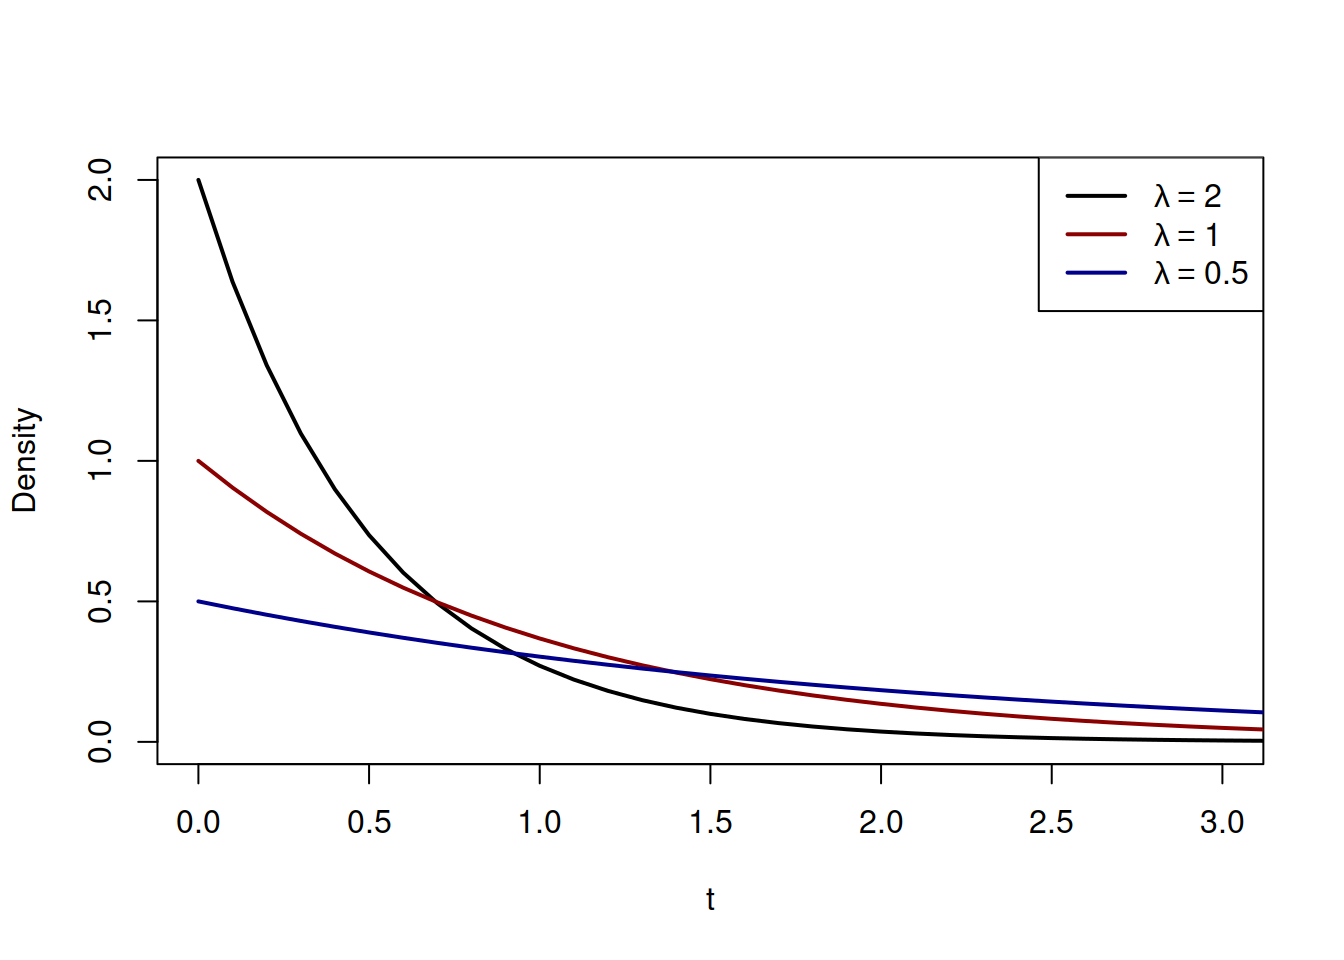 Probability Density Function of Exponential distribution with several values of rate parameter $\lambda$.